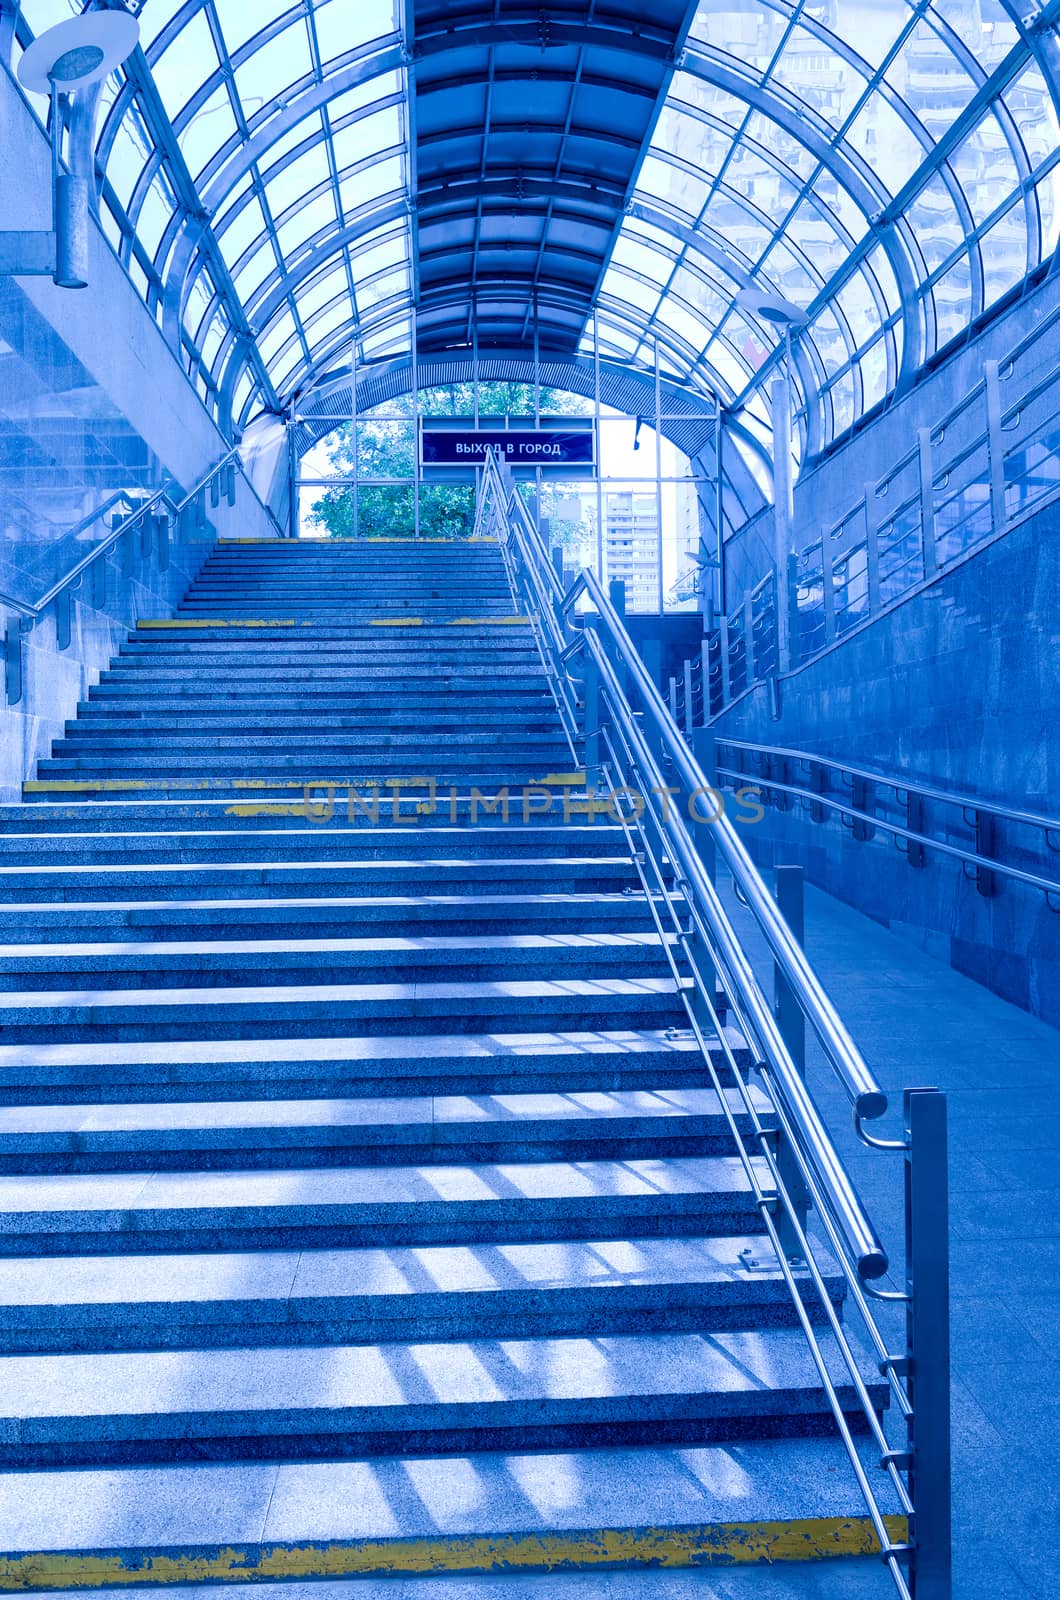 subway station interior with stairs up